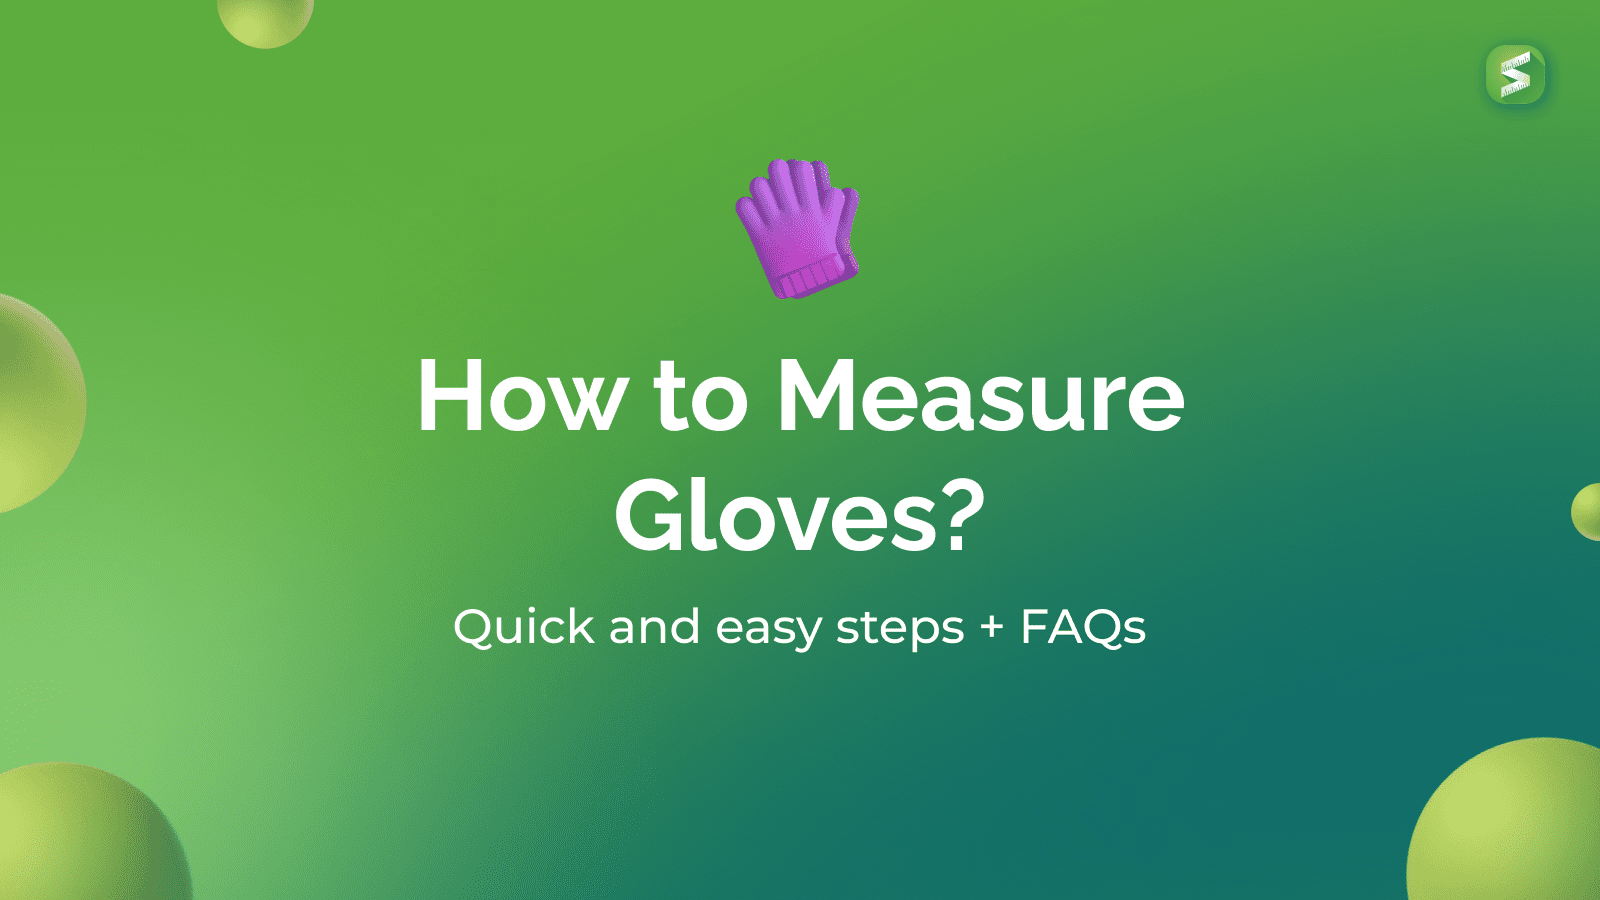 How to Measure Gloves 1